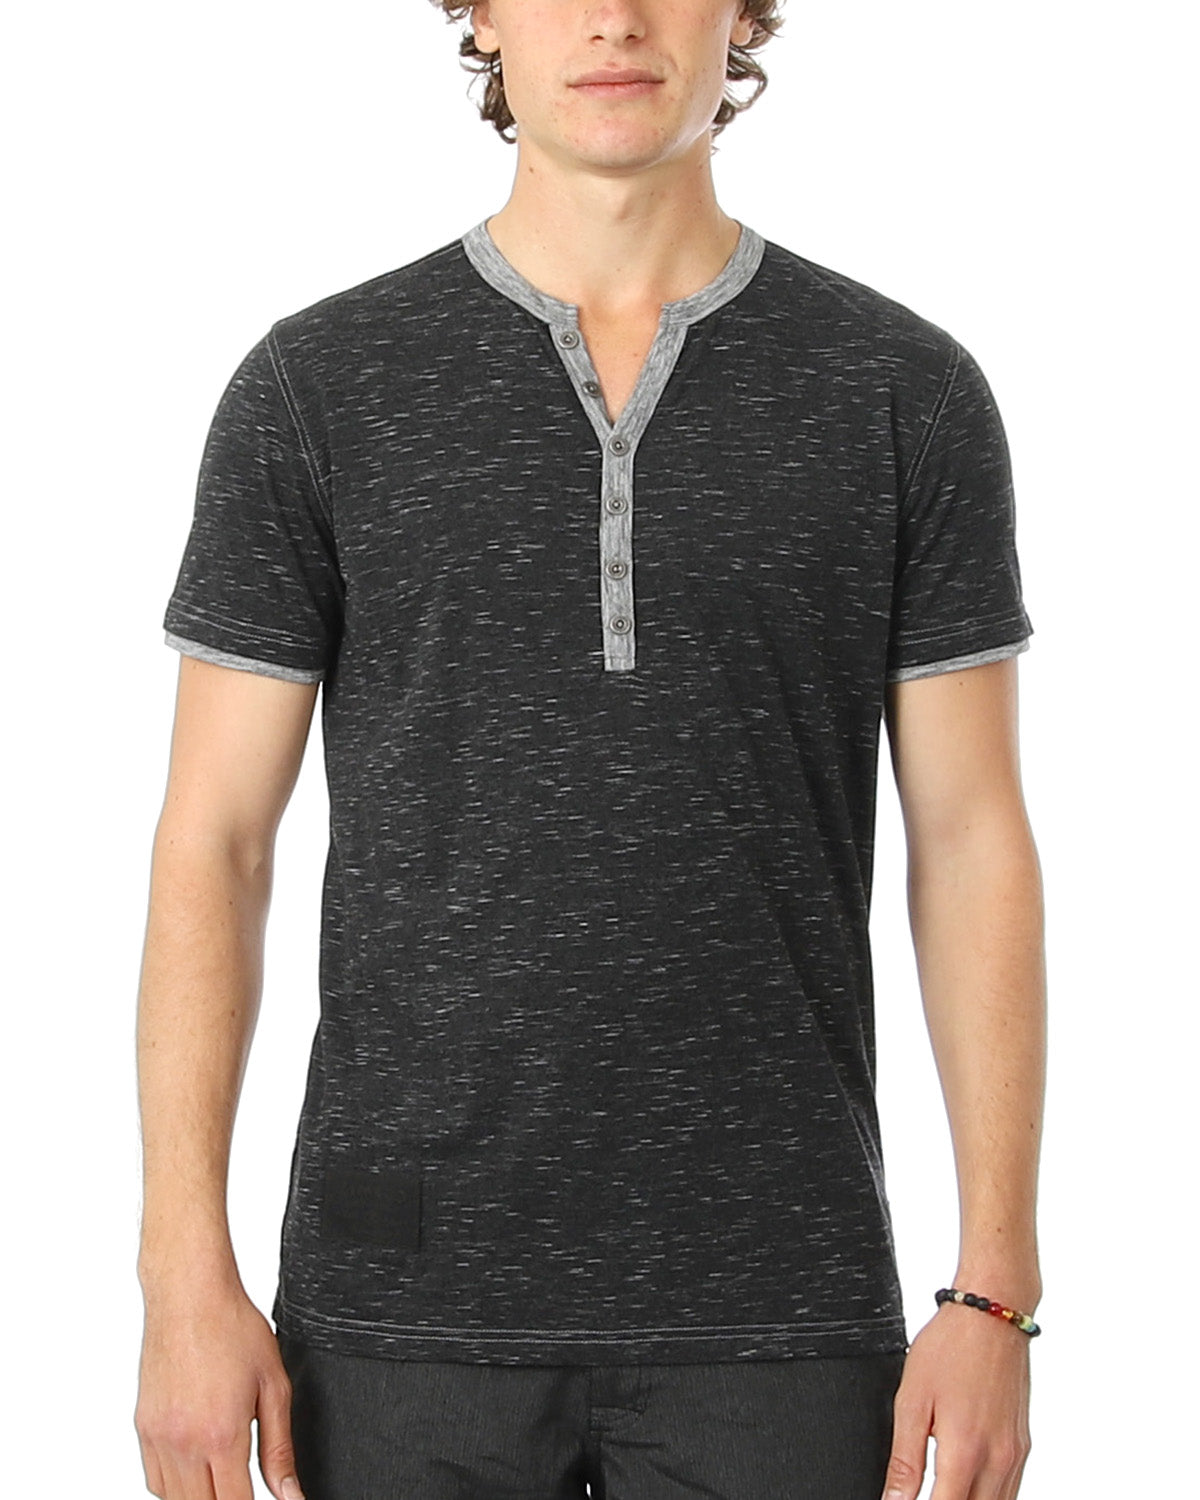 Men's Henley T Shirts – Short Sleeve Contrast Neck and Hem Active Casual Fashion Tees Tops